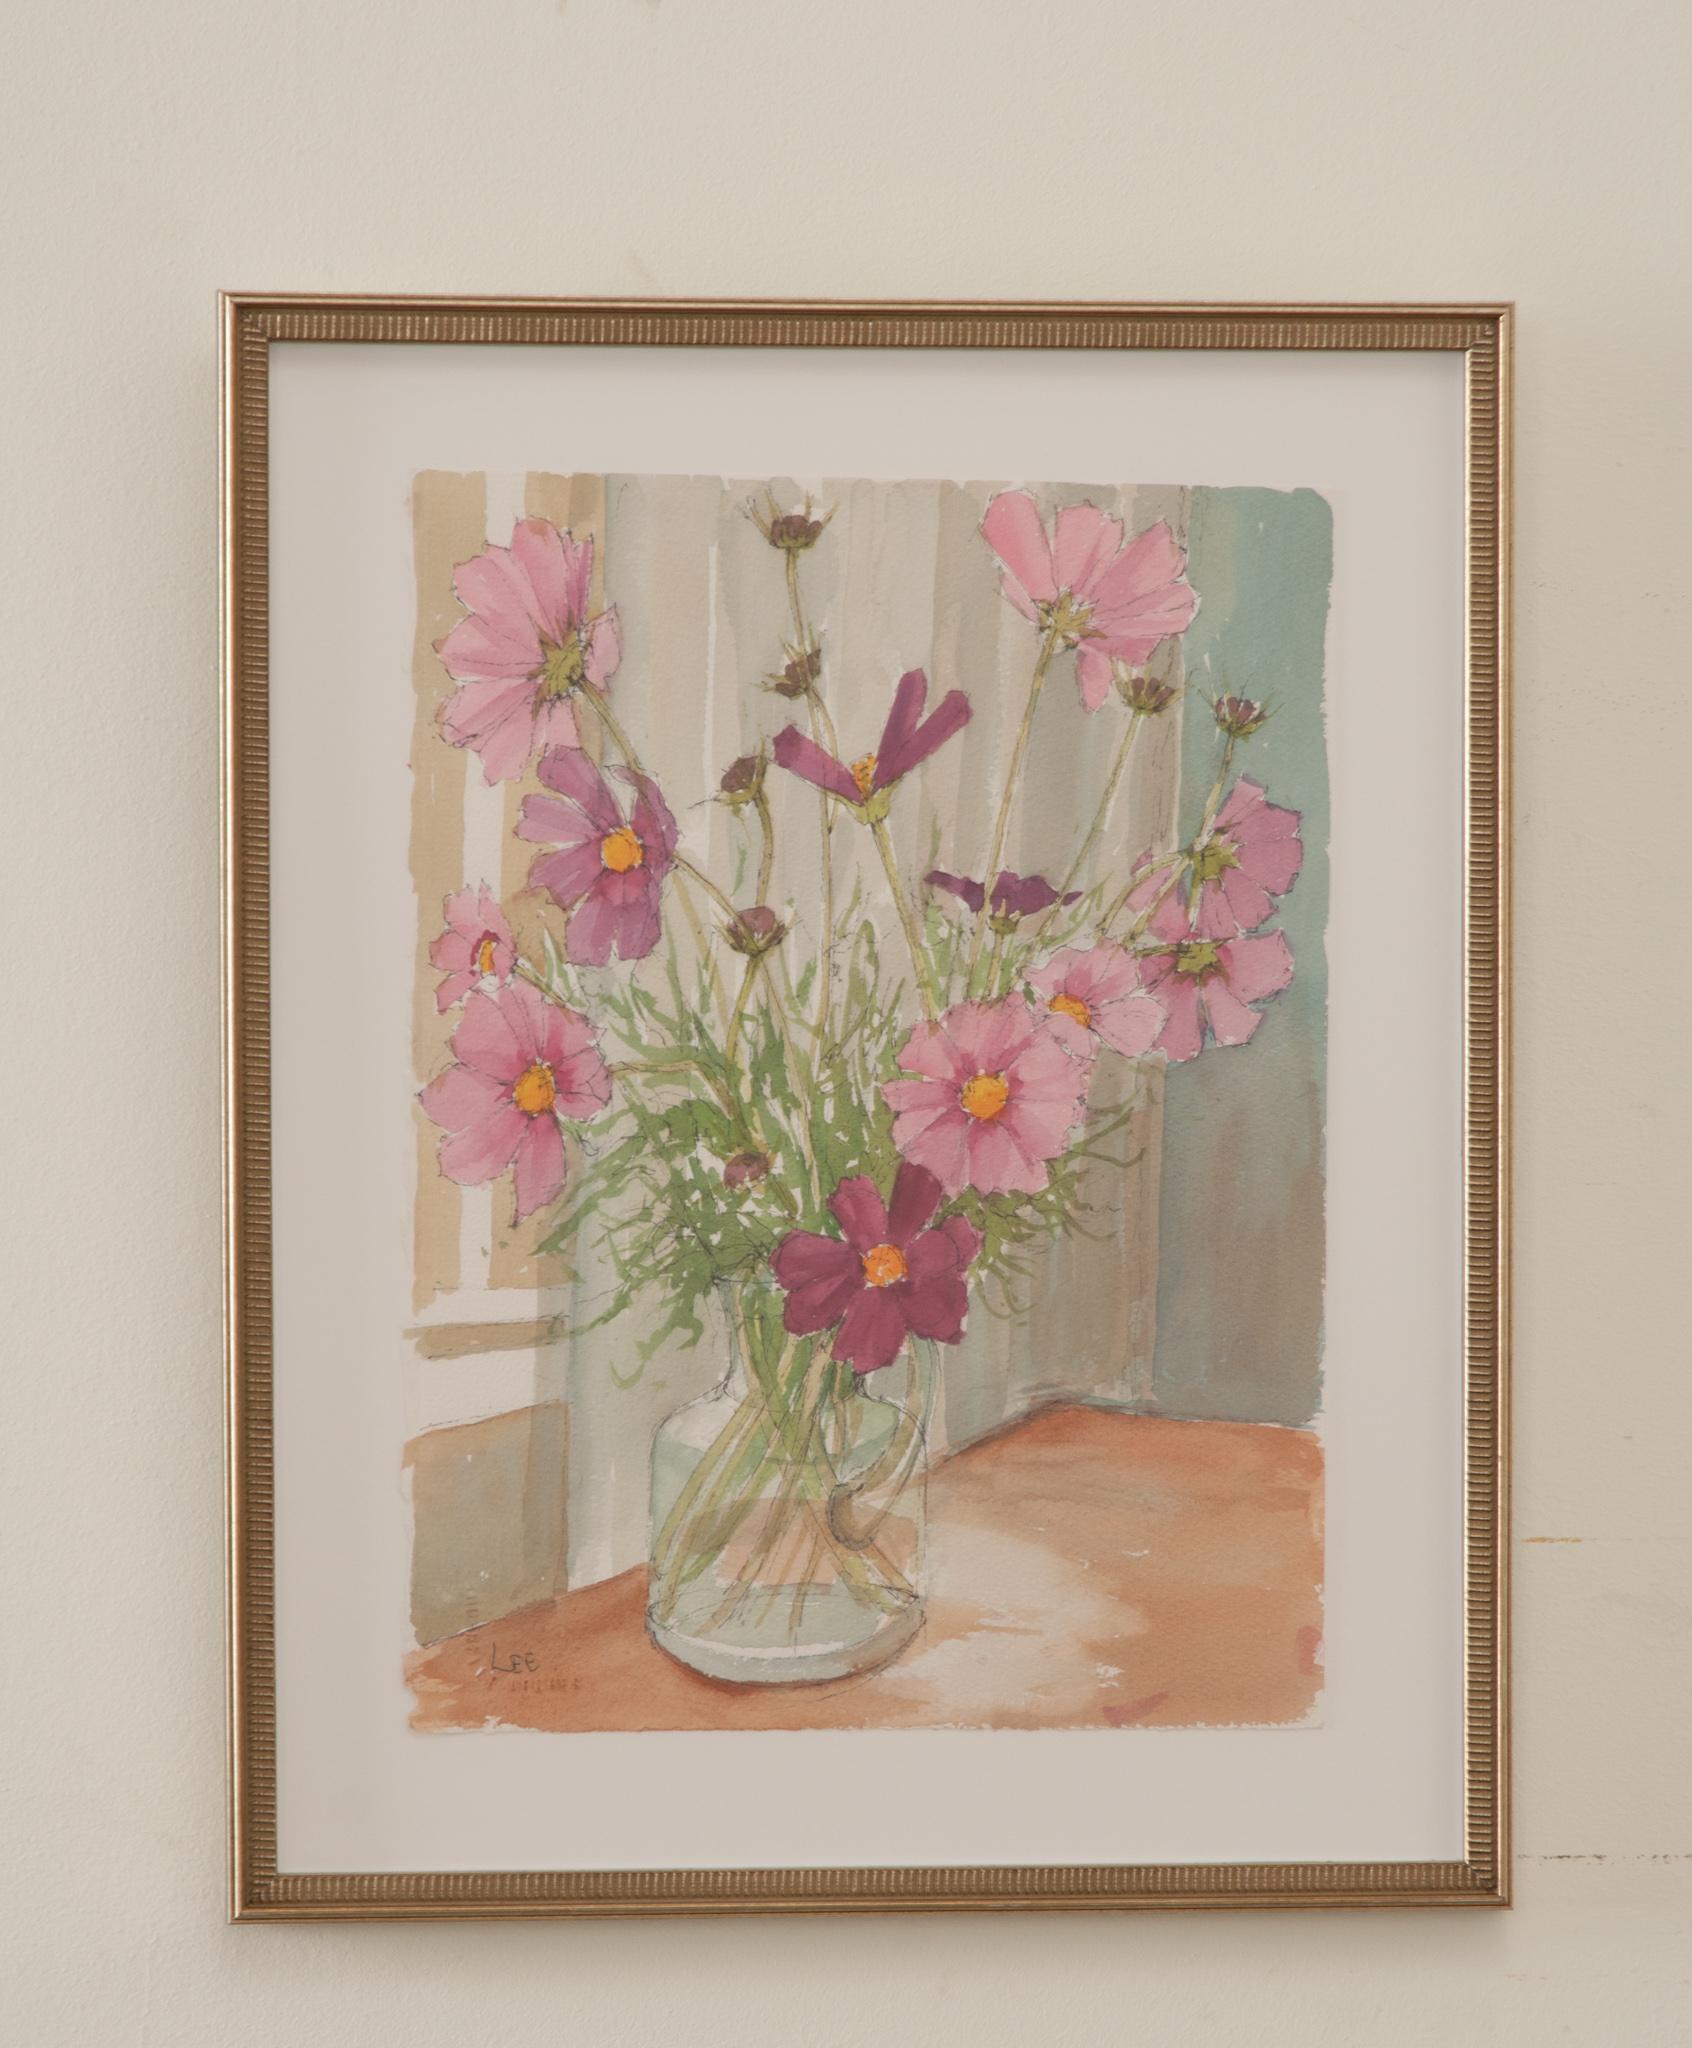 A wonderful original watercolor still life attributed to painter Eric Leazell, signed by the artist. Eric “Lee” Leazell was a 20th century British artist born in 1933. He had a highly prolific career painting in oils and watercolor. His paintings